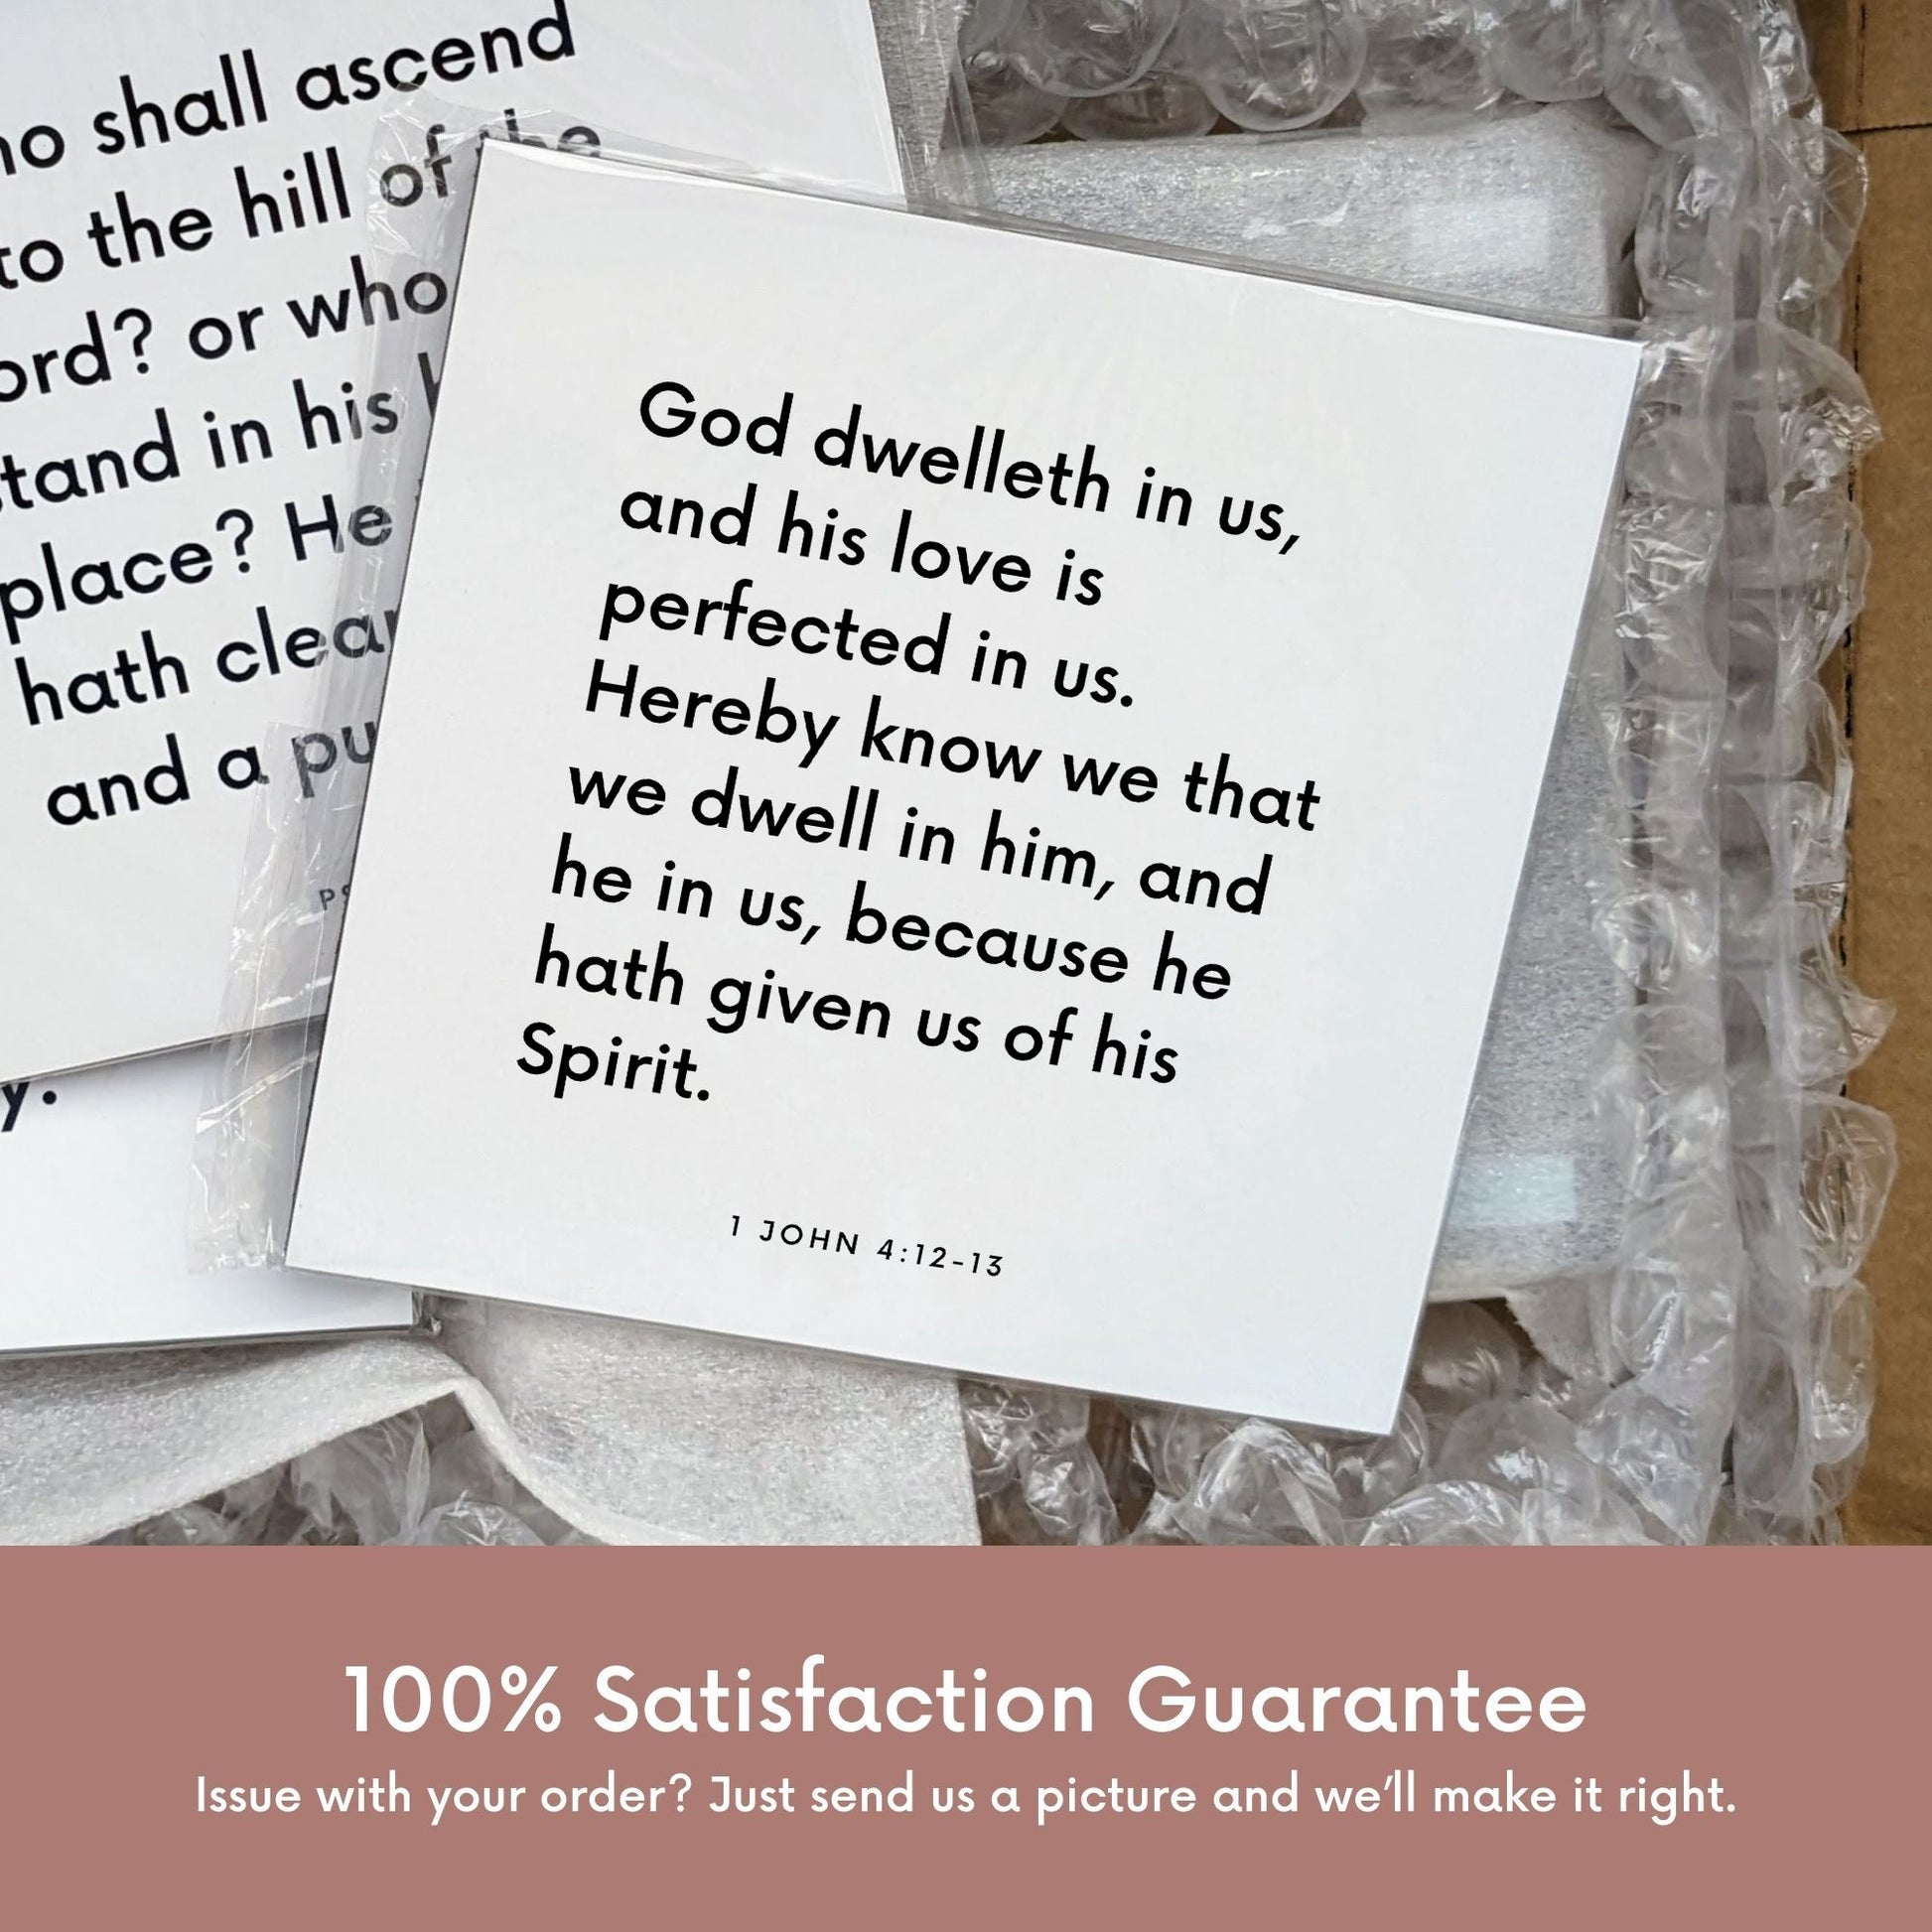 Shipping materials for scripture tile of 1 John 4:12-13 - "Hereby know we that we dwell in him"